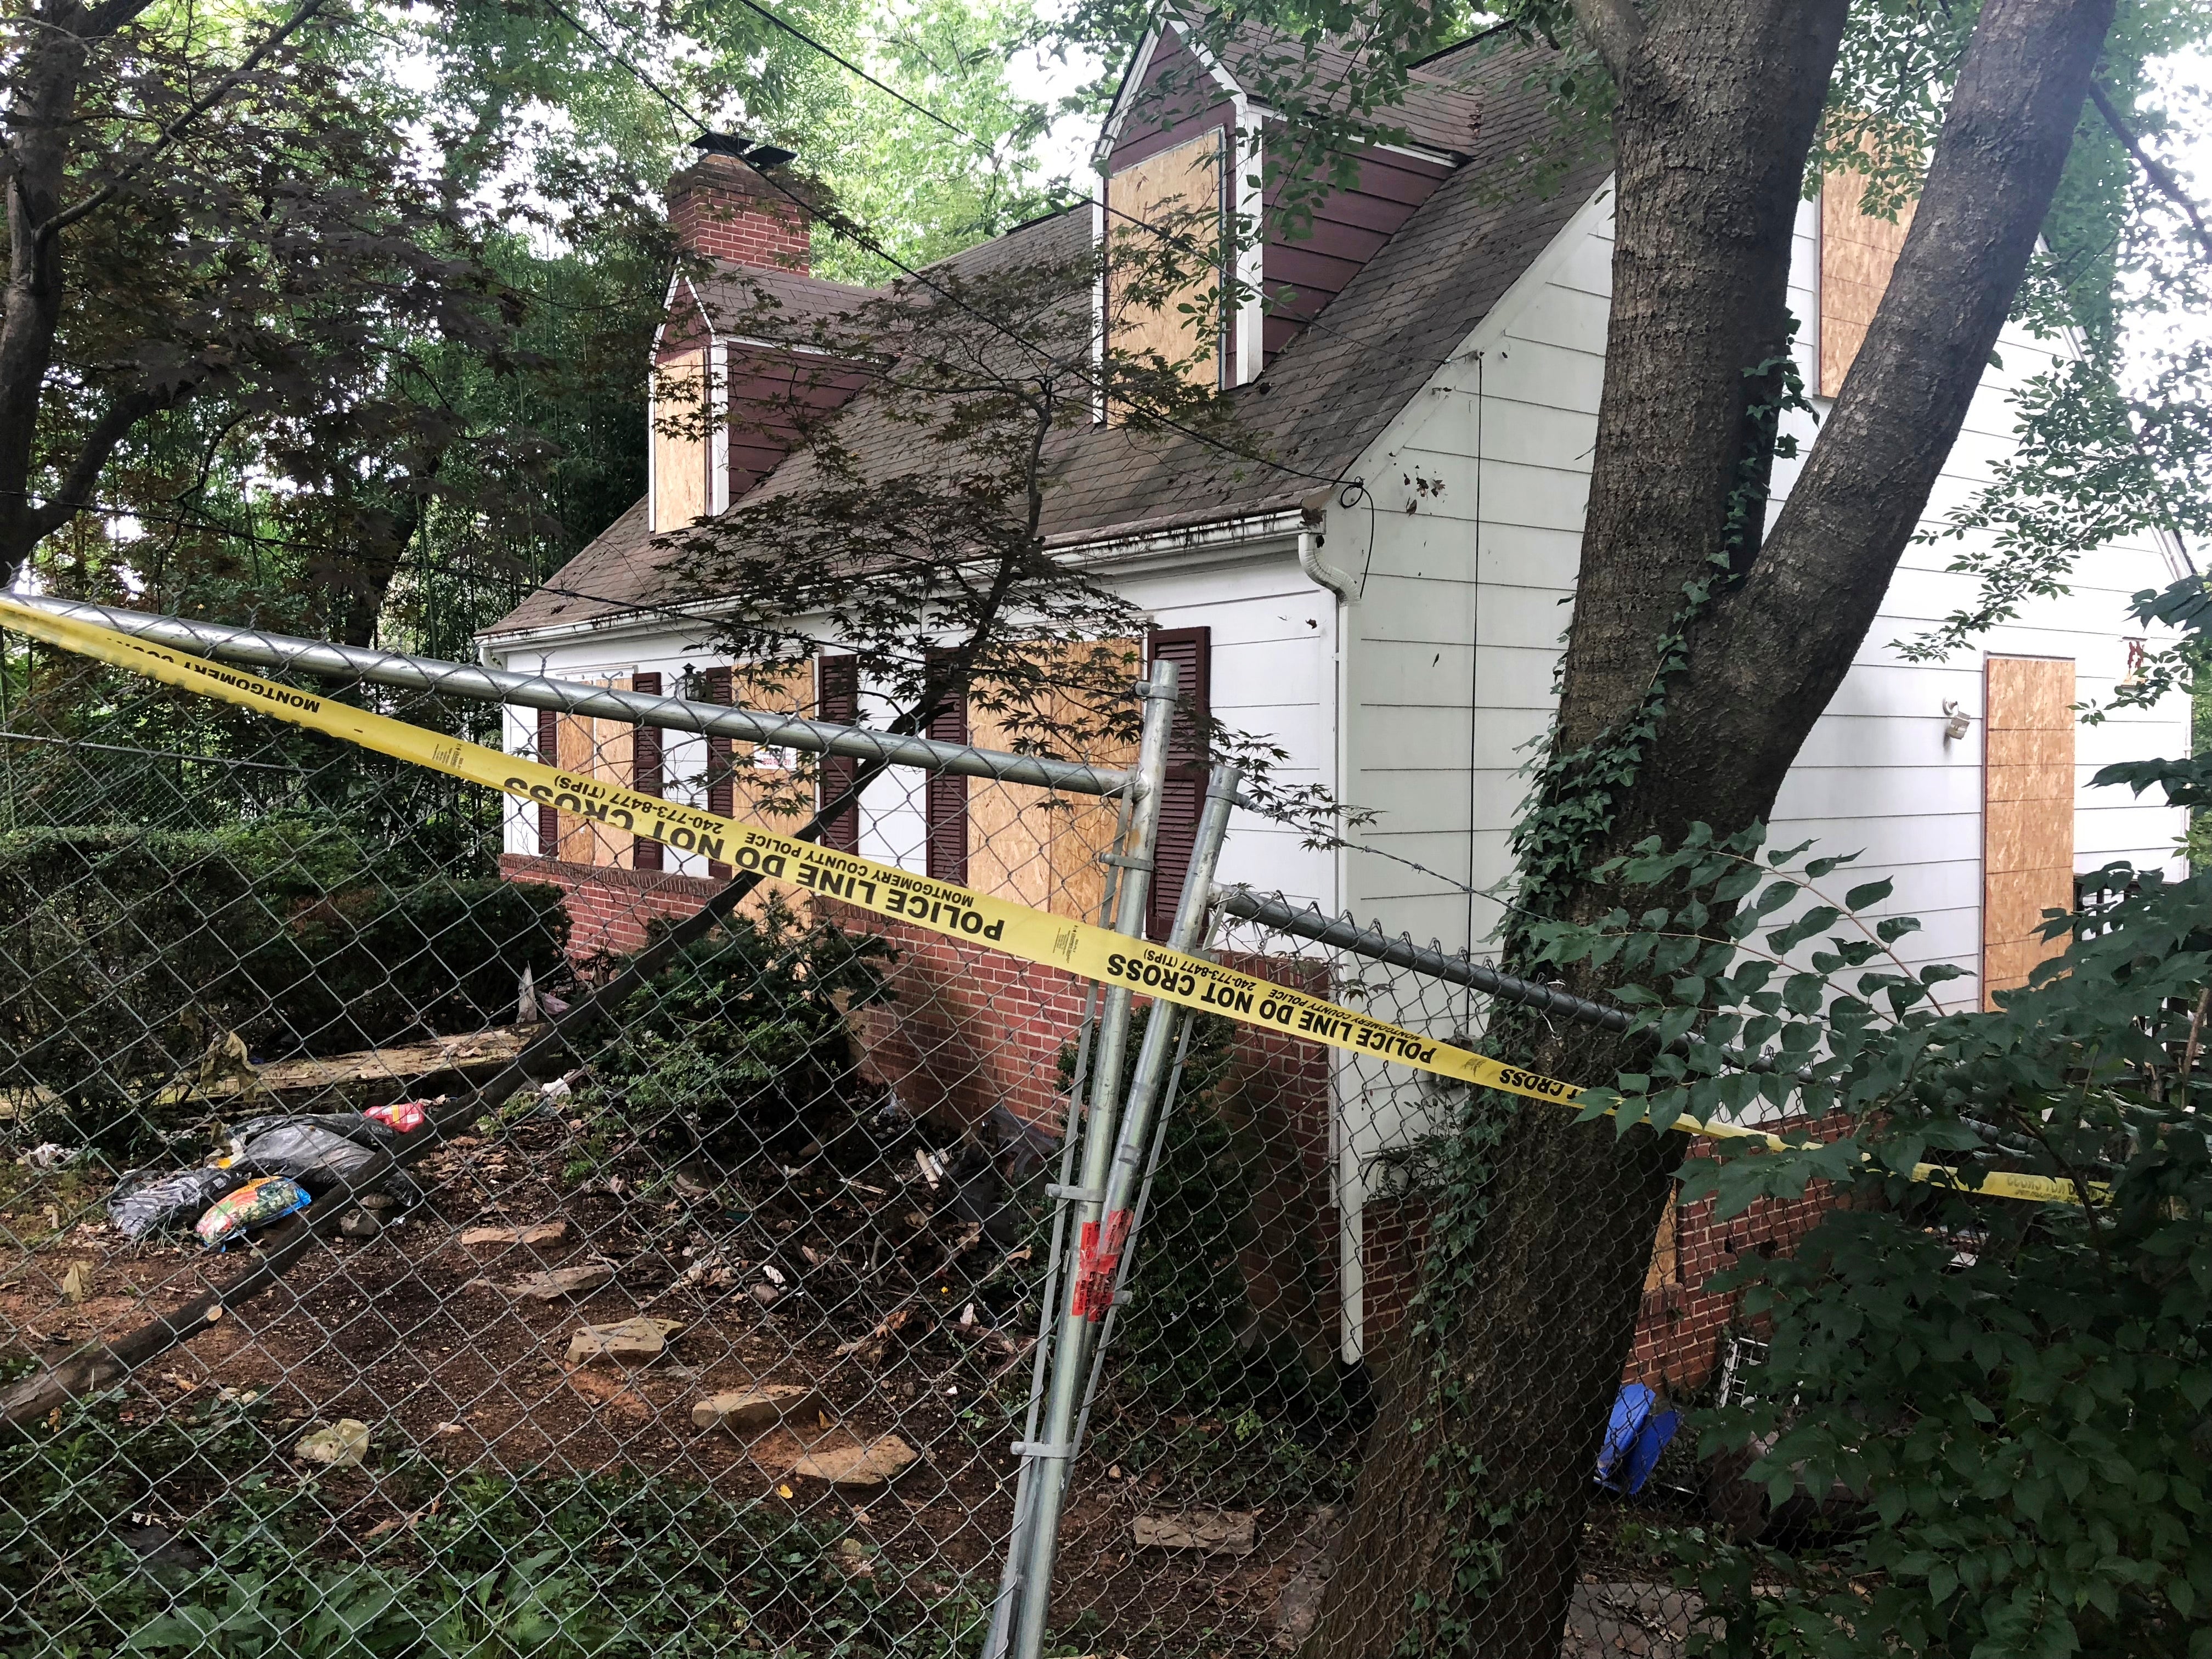 Police tape surrounds the home where Khafra was killed